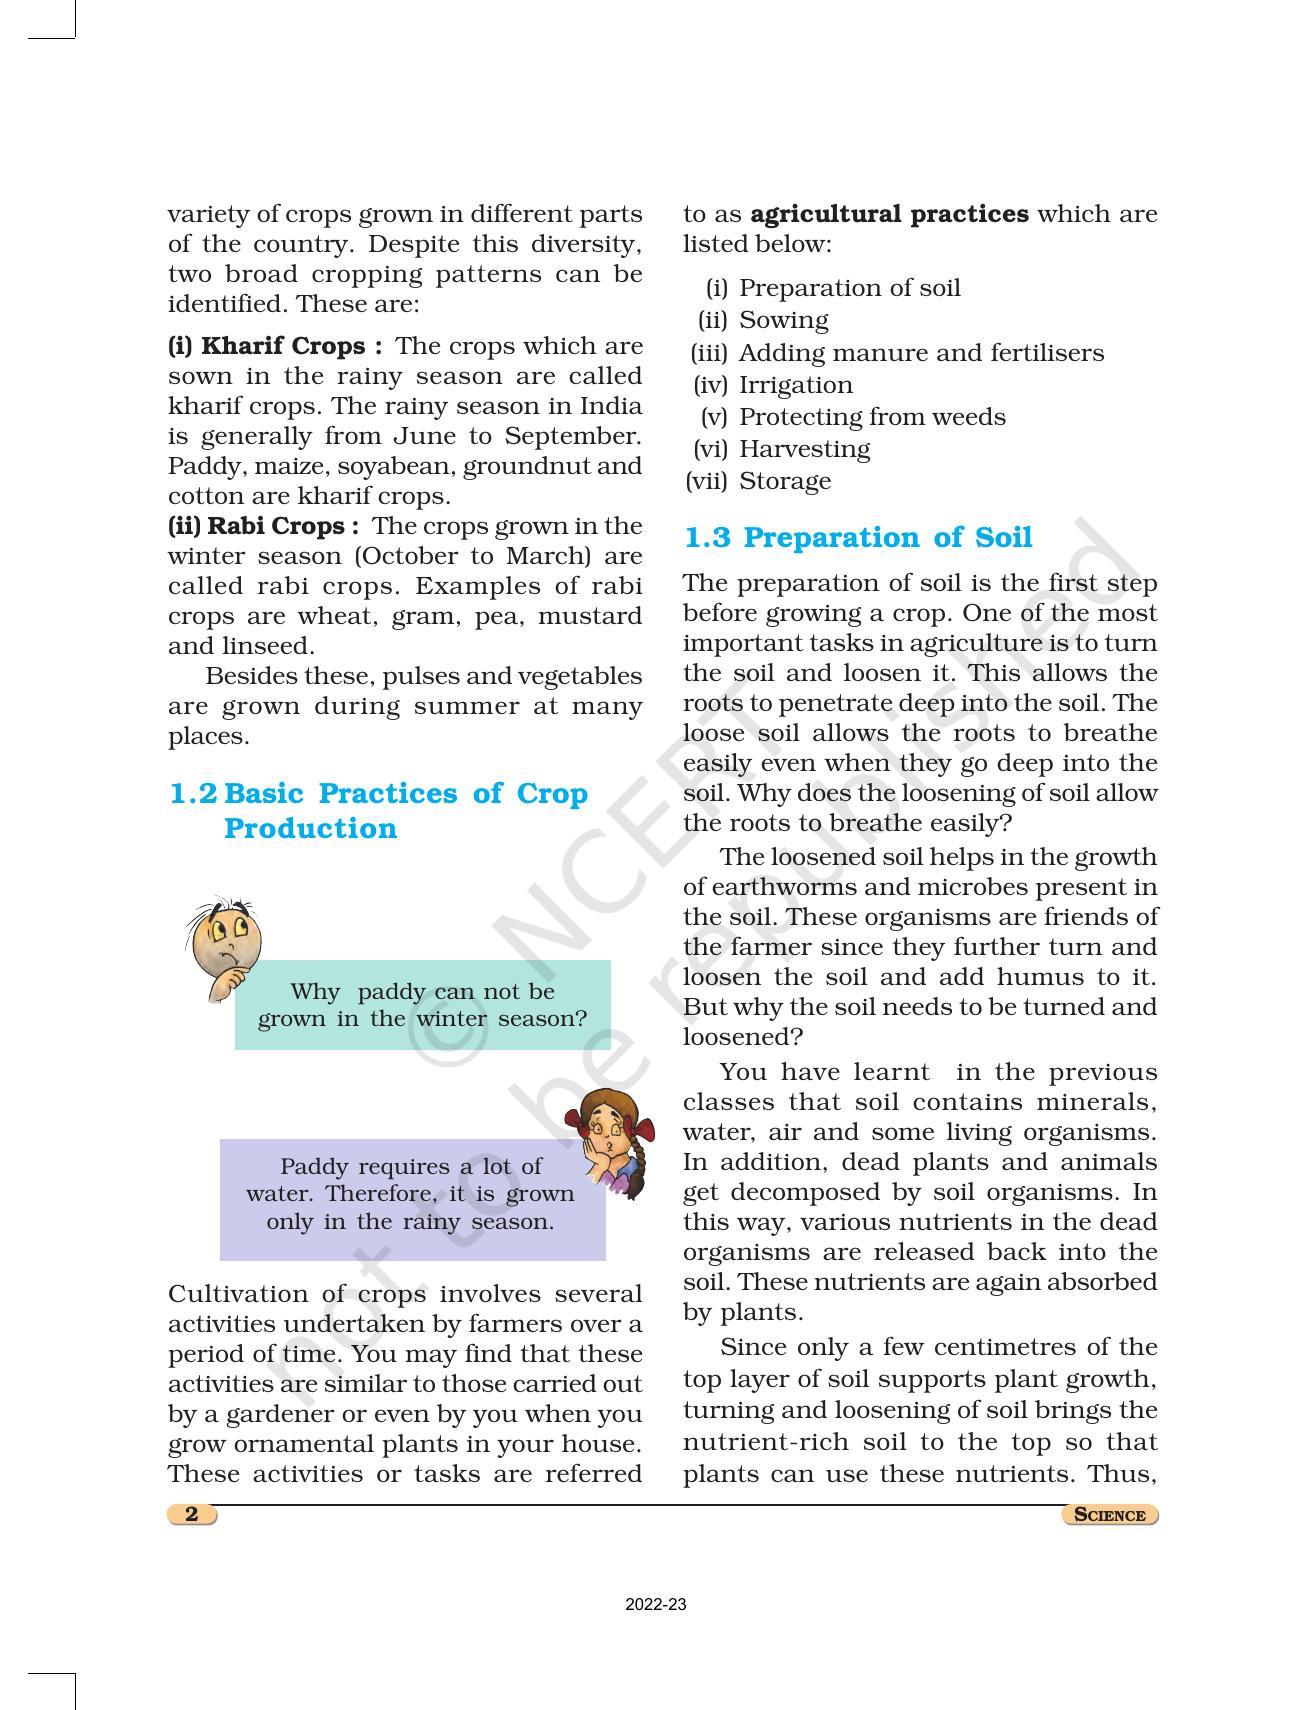 NCERT Book for Class 8 Science Chapter 1 Crop Production and Management - Page 2